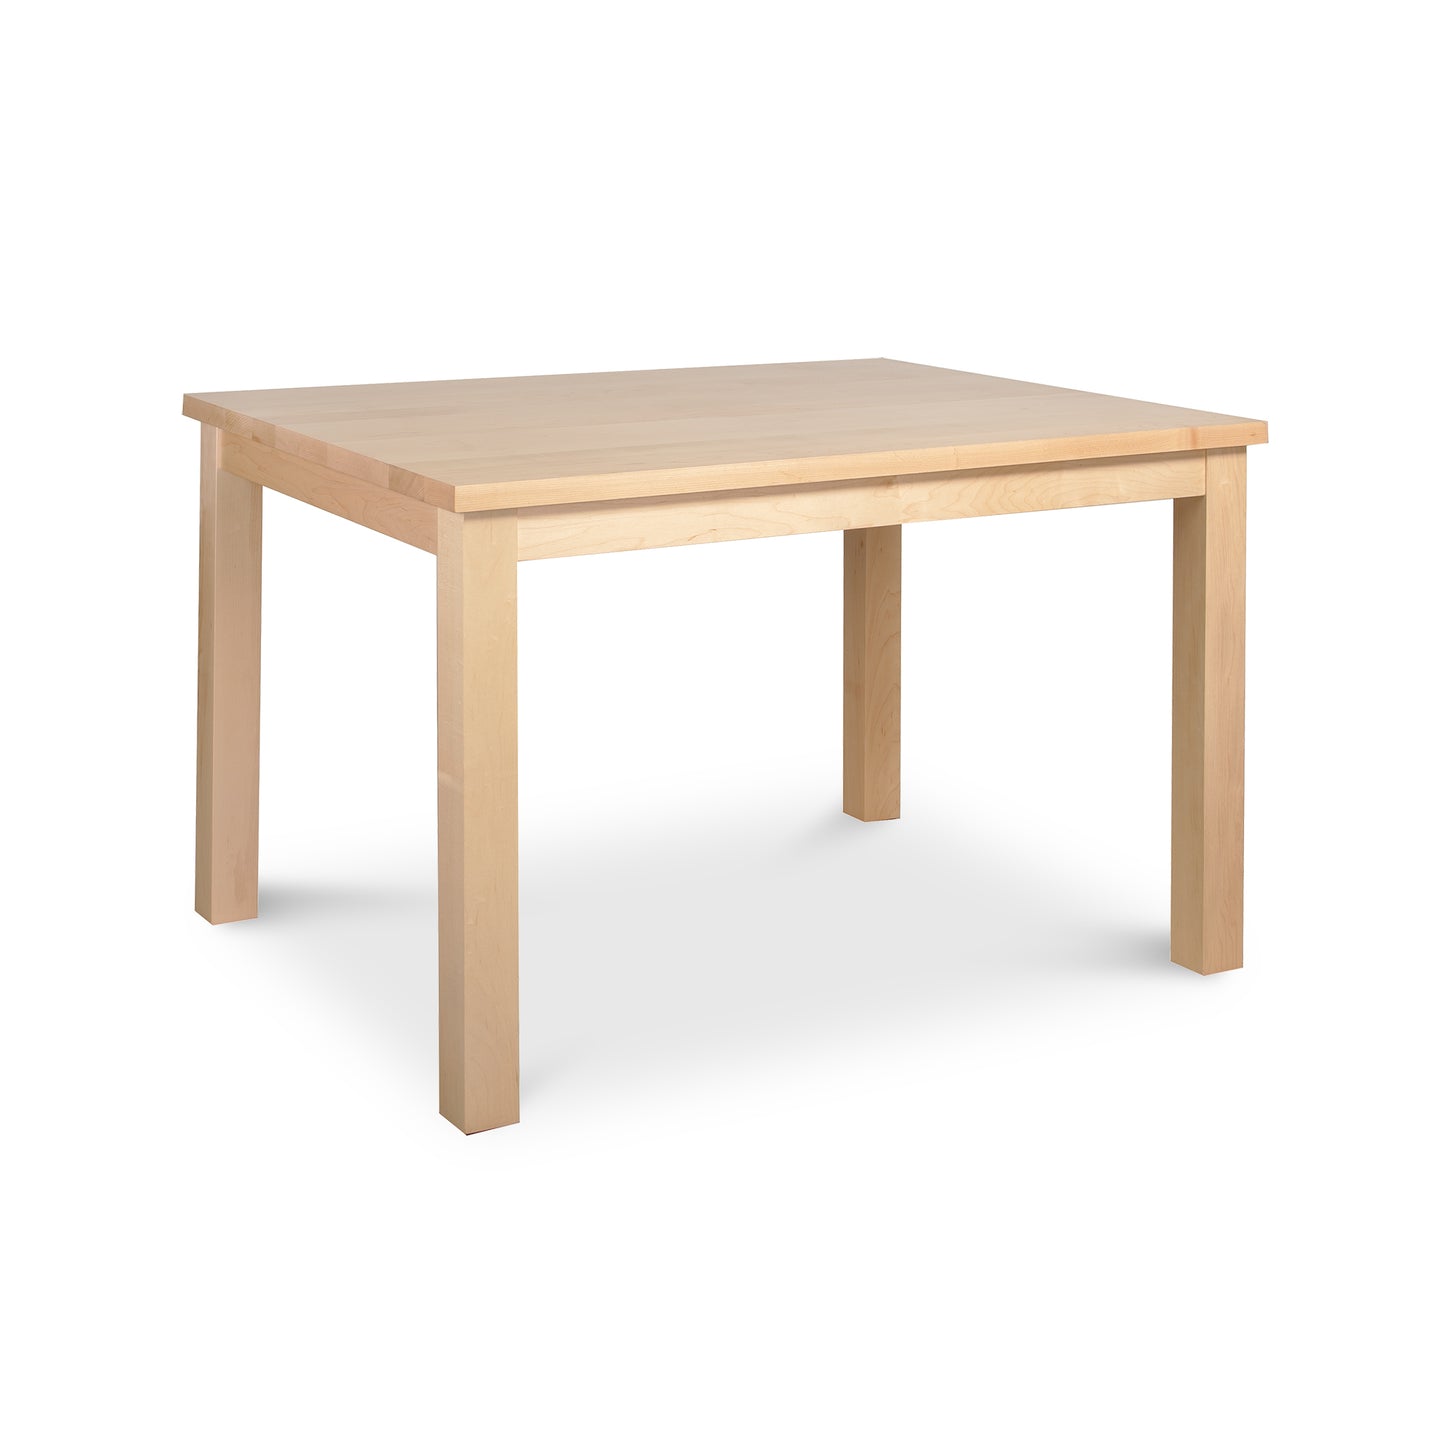 Featuring sustainable harvested woods, the Lyndon Furniture Modern Mission Parsons Solid Top Table showcases an eco-friendly design with a solid wooden top.